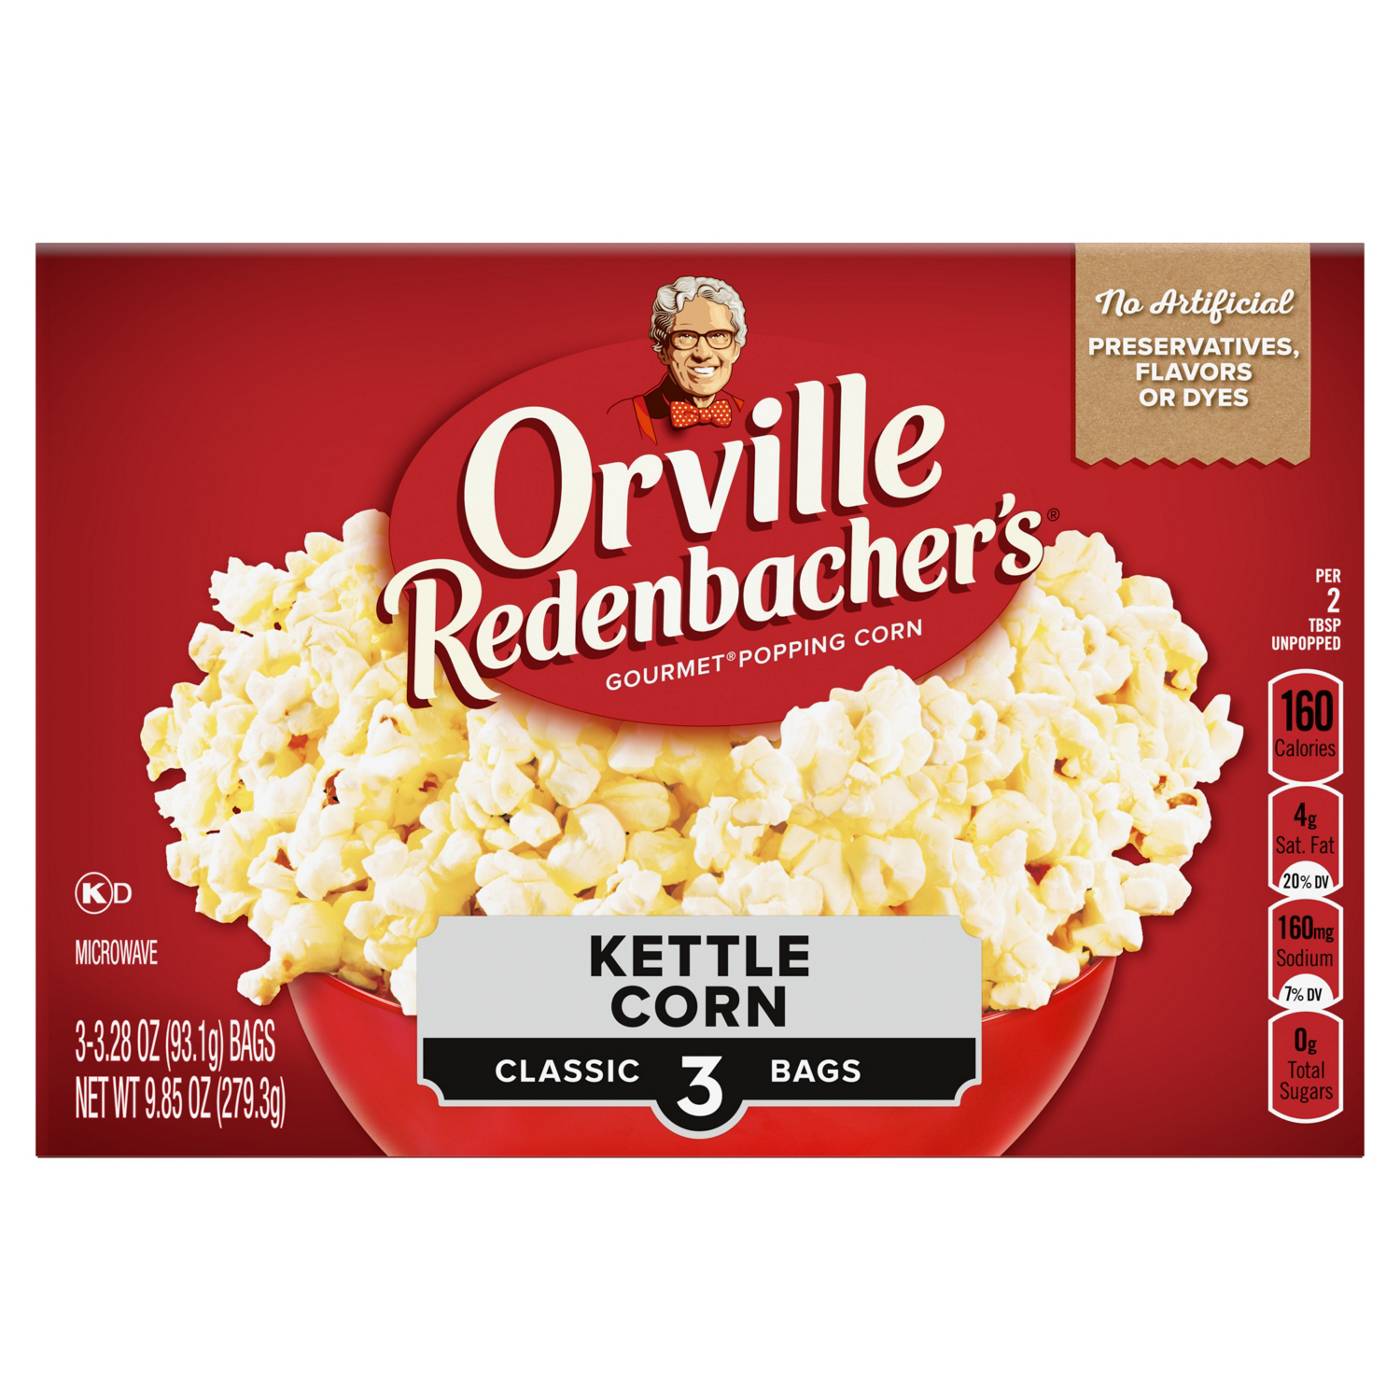 Orville Redenbacher's Microwave Kettle Corn; image 4 of 4